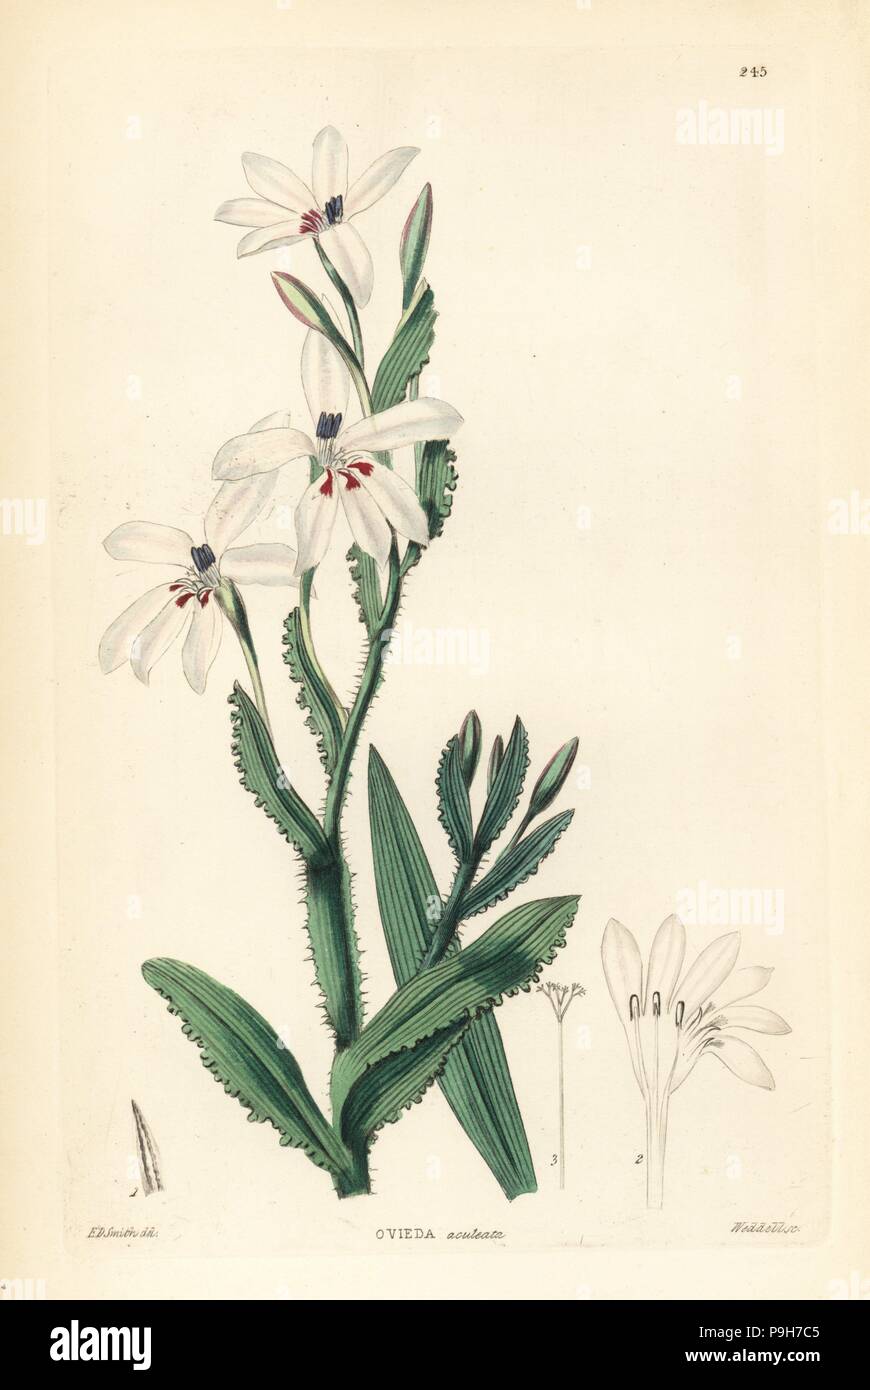 Lapeirousia fabricii (Prickly stemmed ovieda, Ovieda aculeata). Handcoloured copperplate engraving by Weddell after Edwin Dalton Smith from John Lindley and Robert Sweet's Ornamental Flower Garden and Shrubbery, G. Willis, London, 1854. Stock Photo